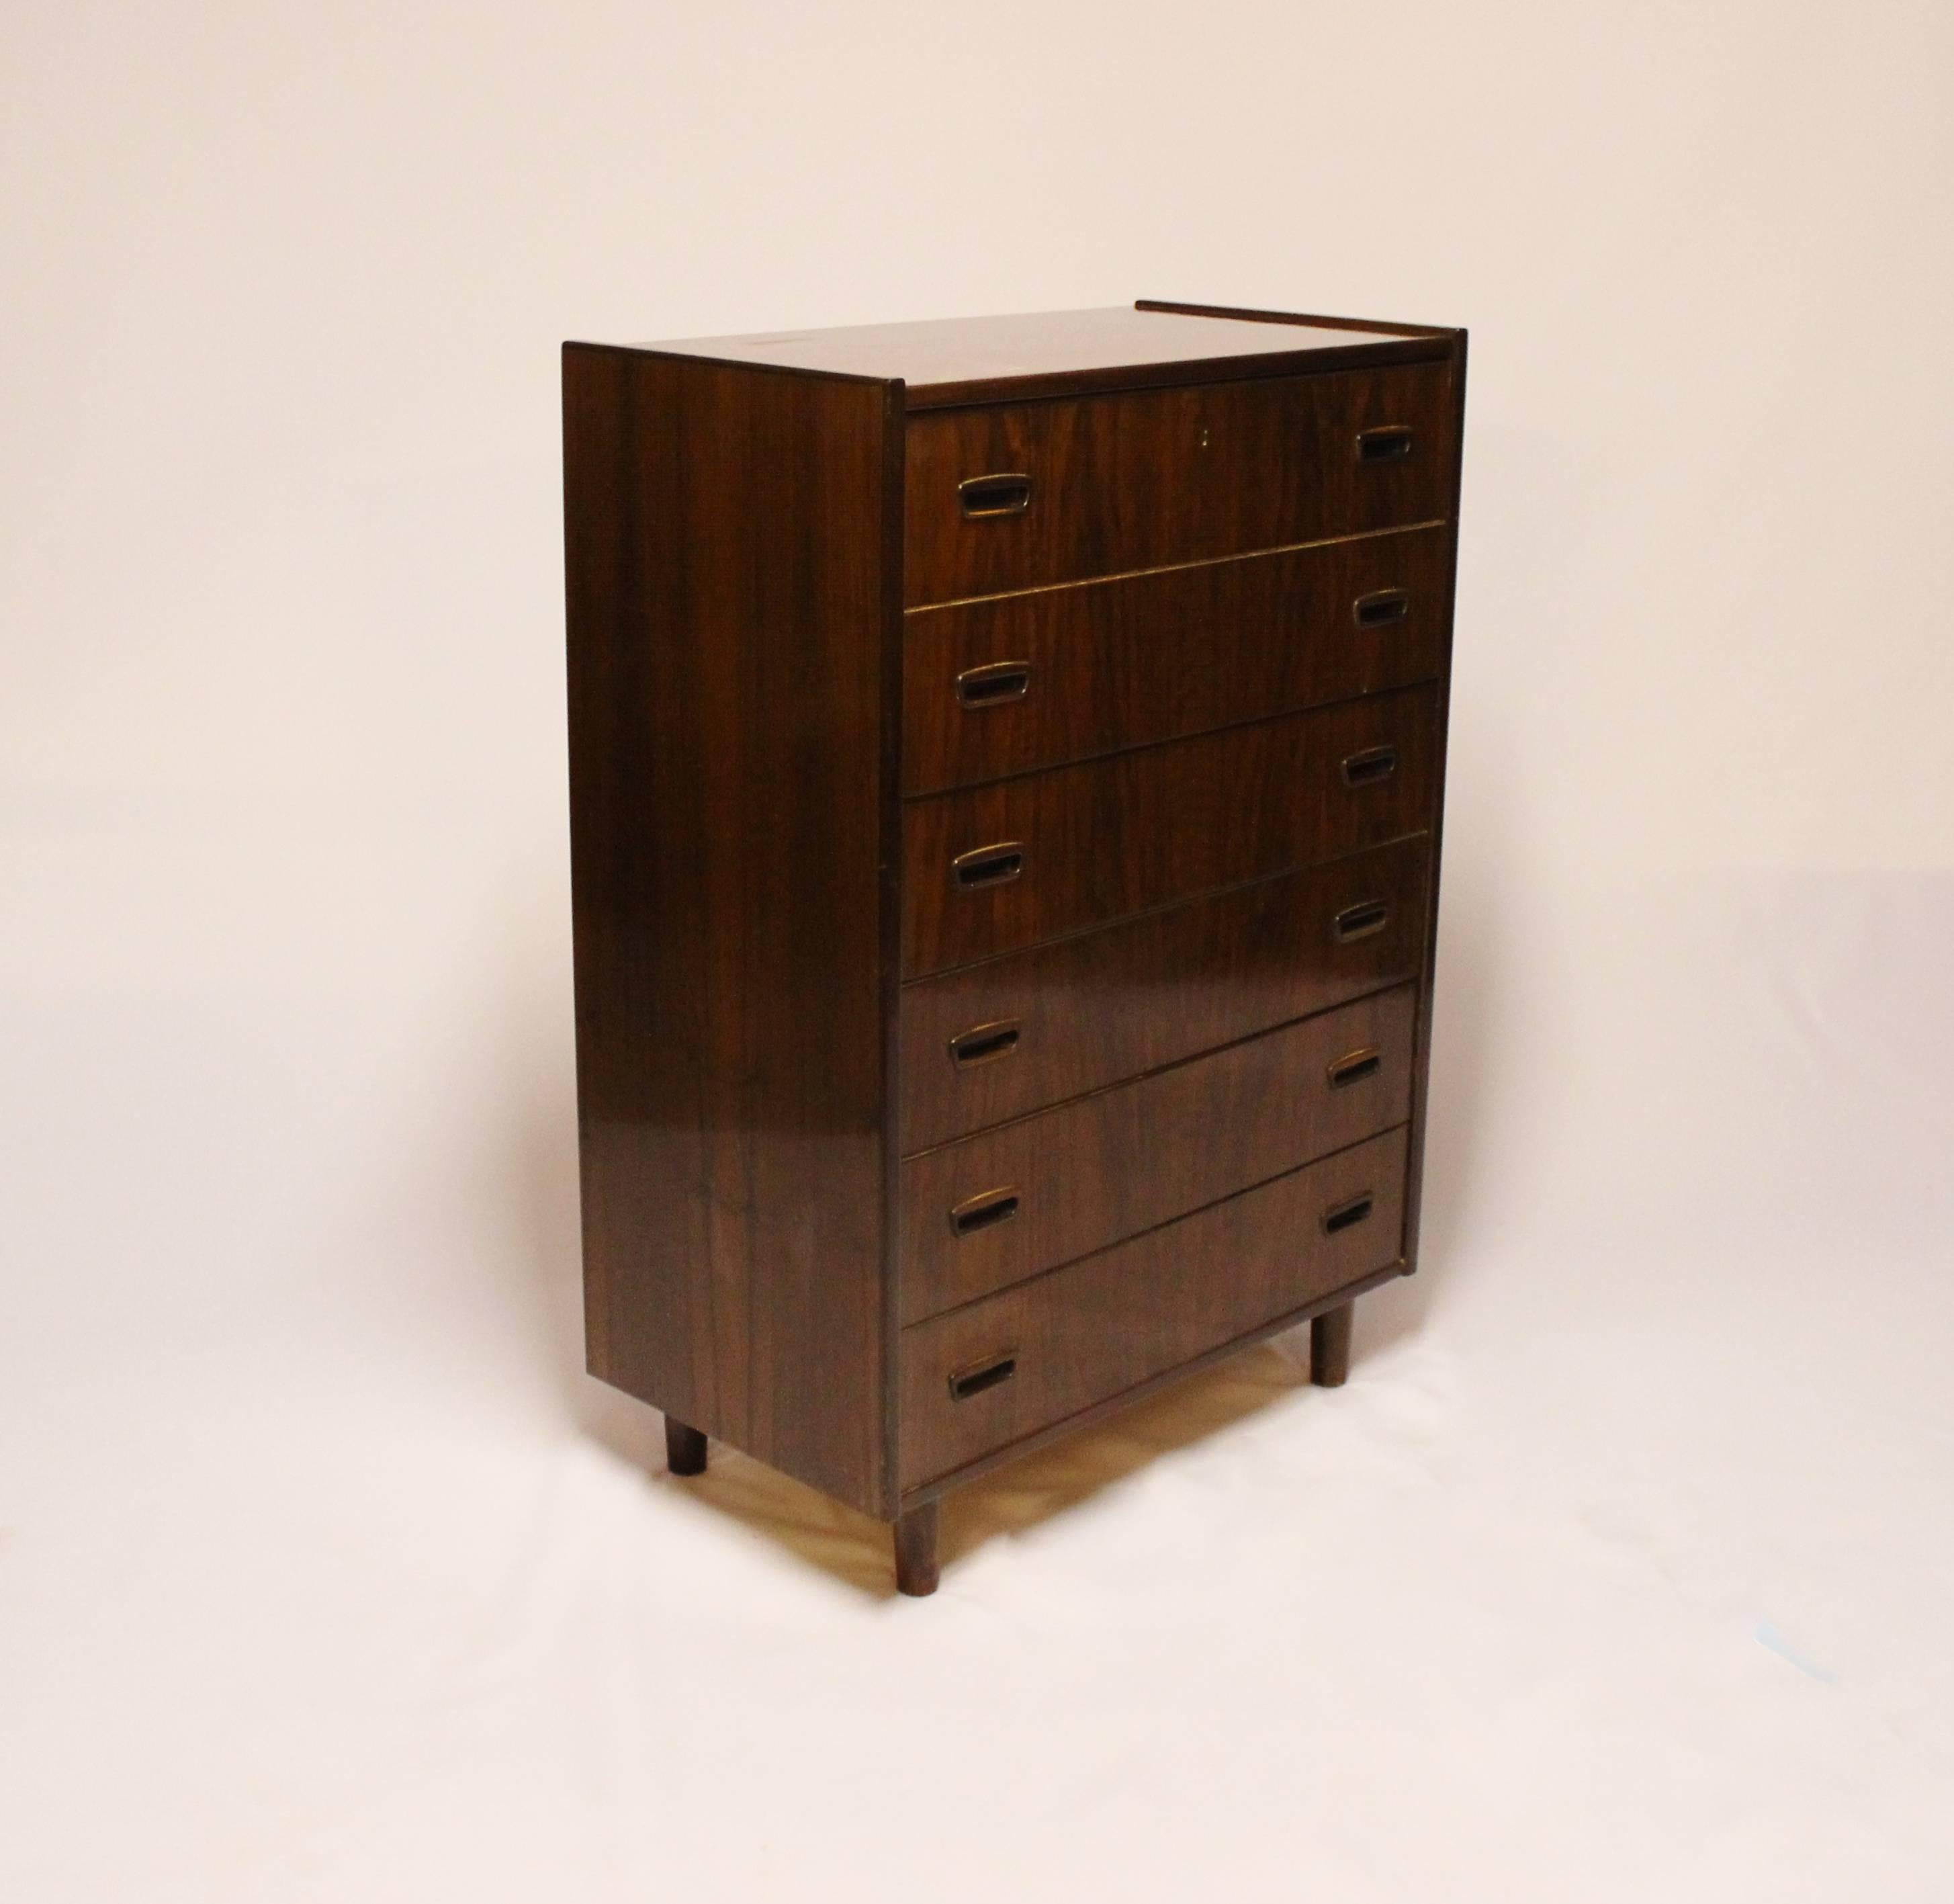 Chest with six drawers in walnut of Danish design from the 1960s. The chest is in great vintage condition.